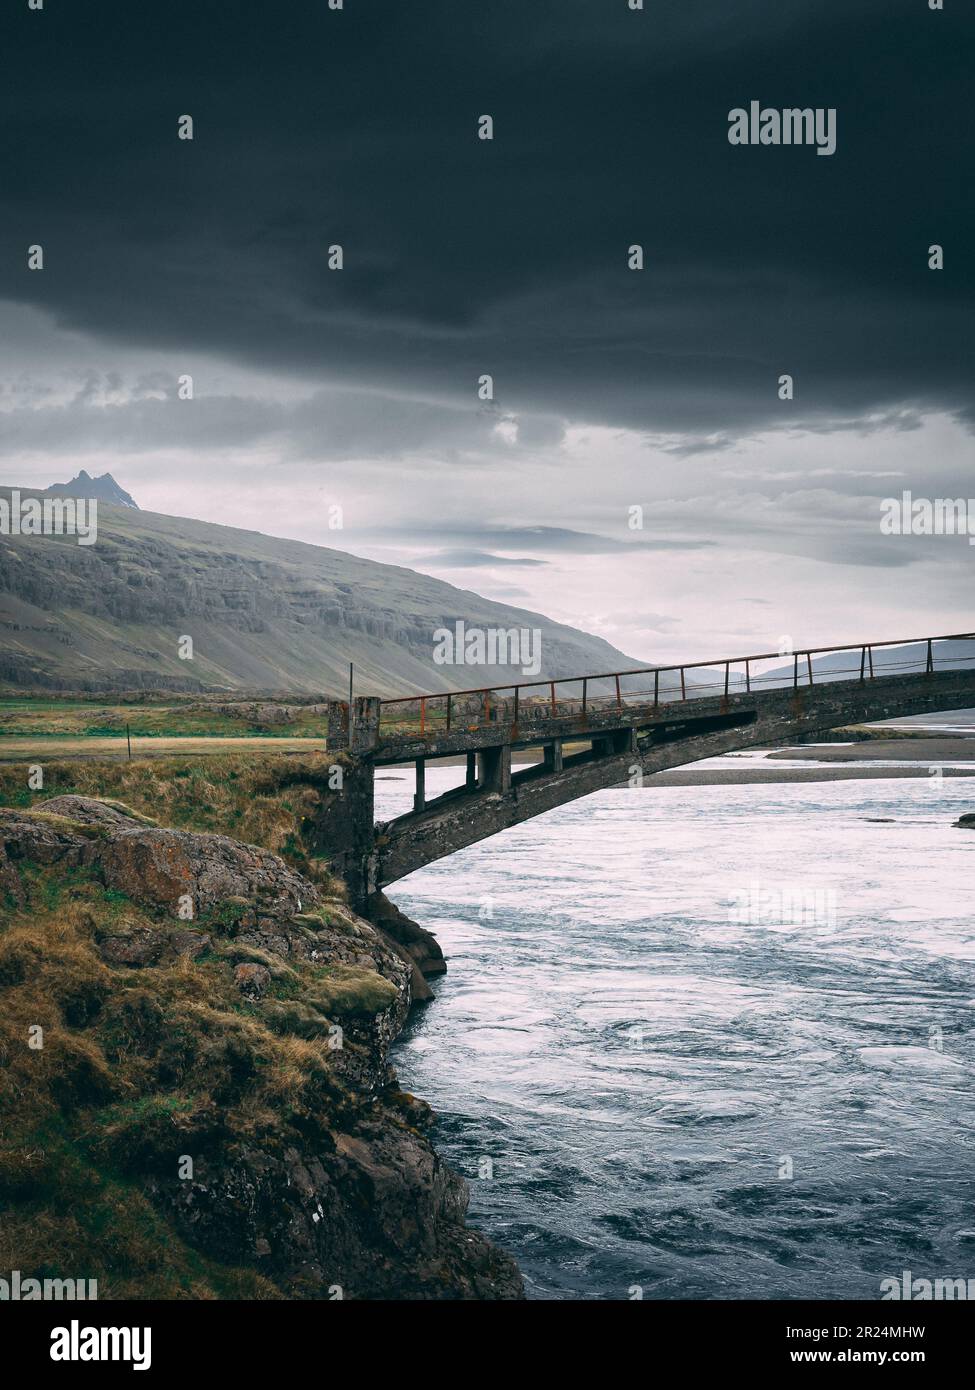 A spectacular view of a bridge arching over a body of water in the East Fjords, Iceland Stock Photo